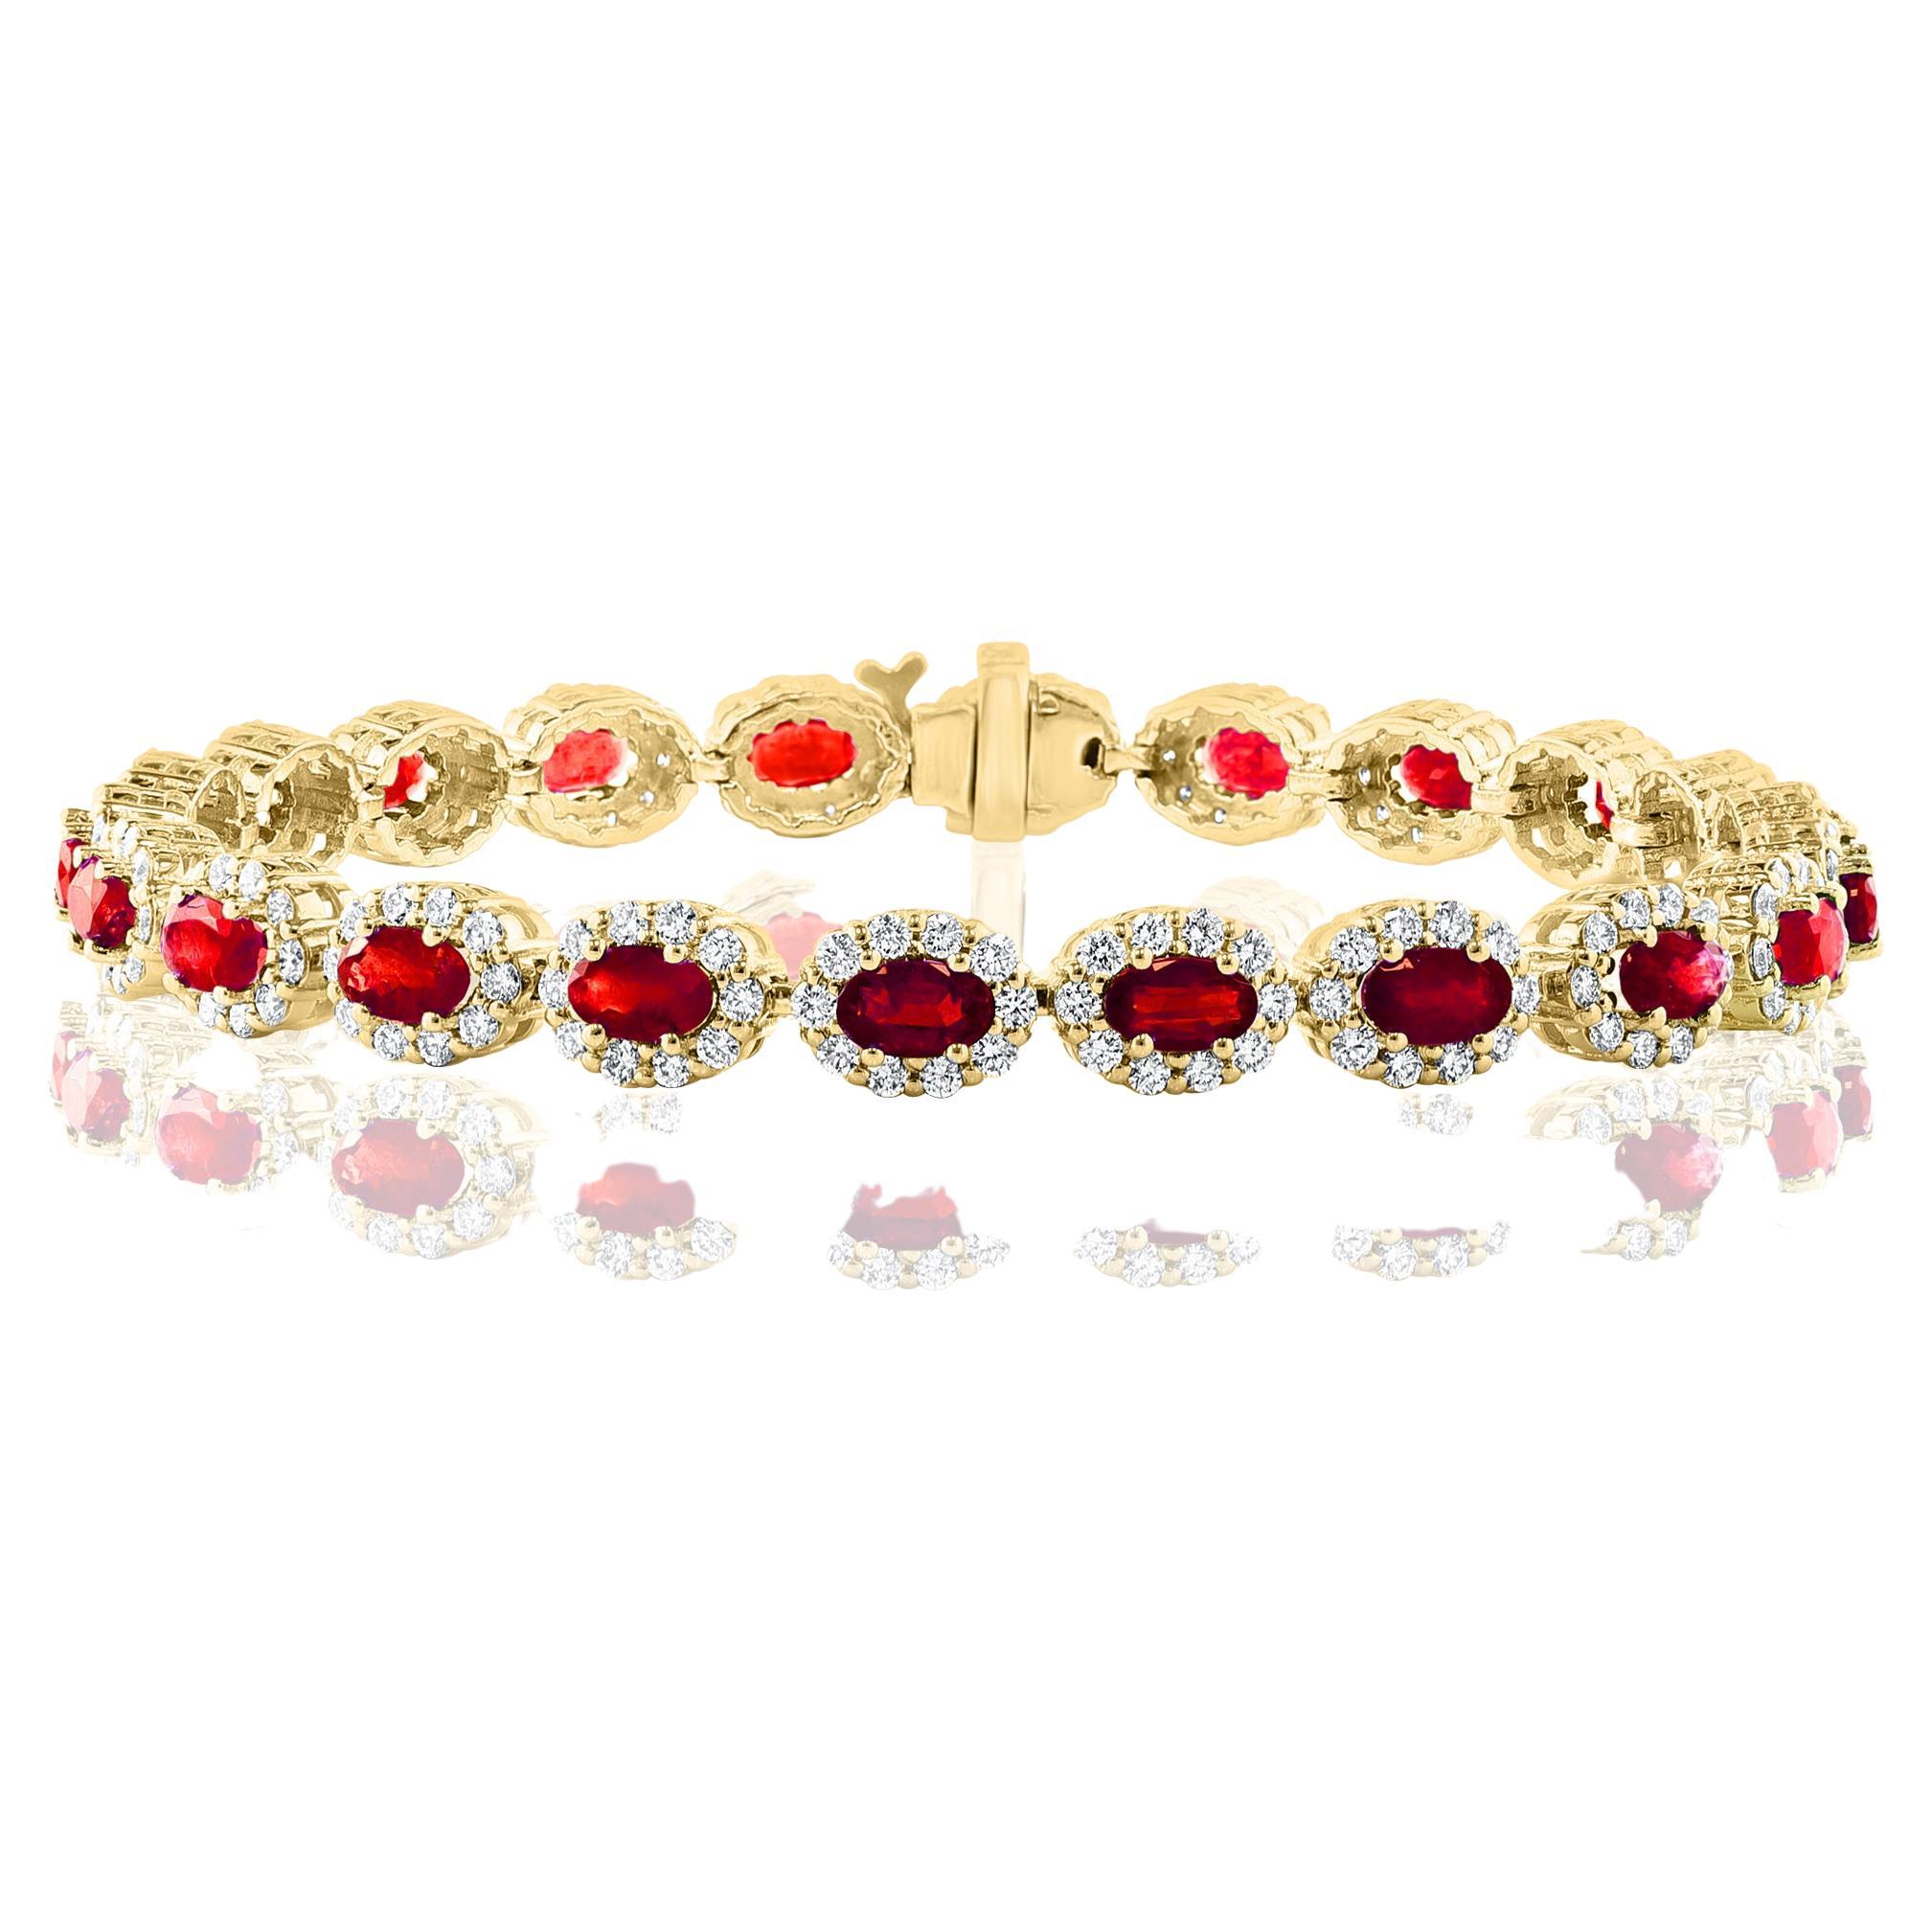 6.43 Carat Oval Cut Ruby and Diamond Halo Bracelet in 14K Yellow Gold